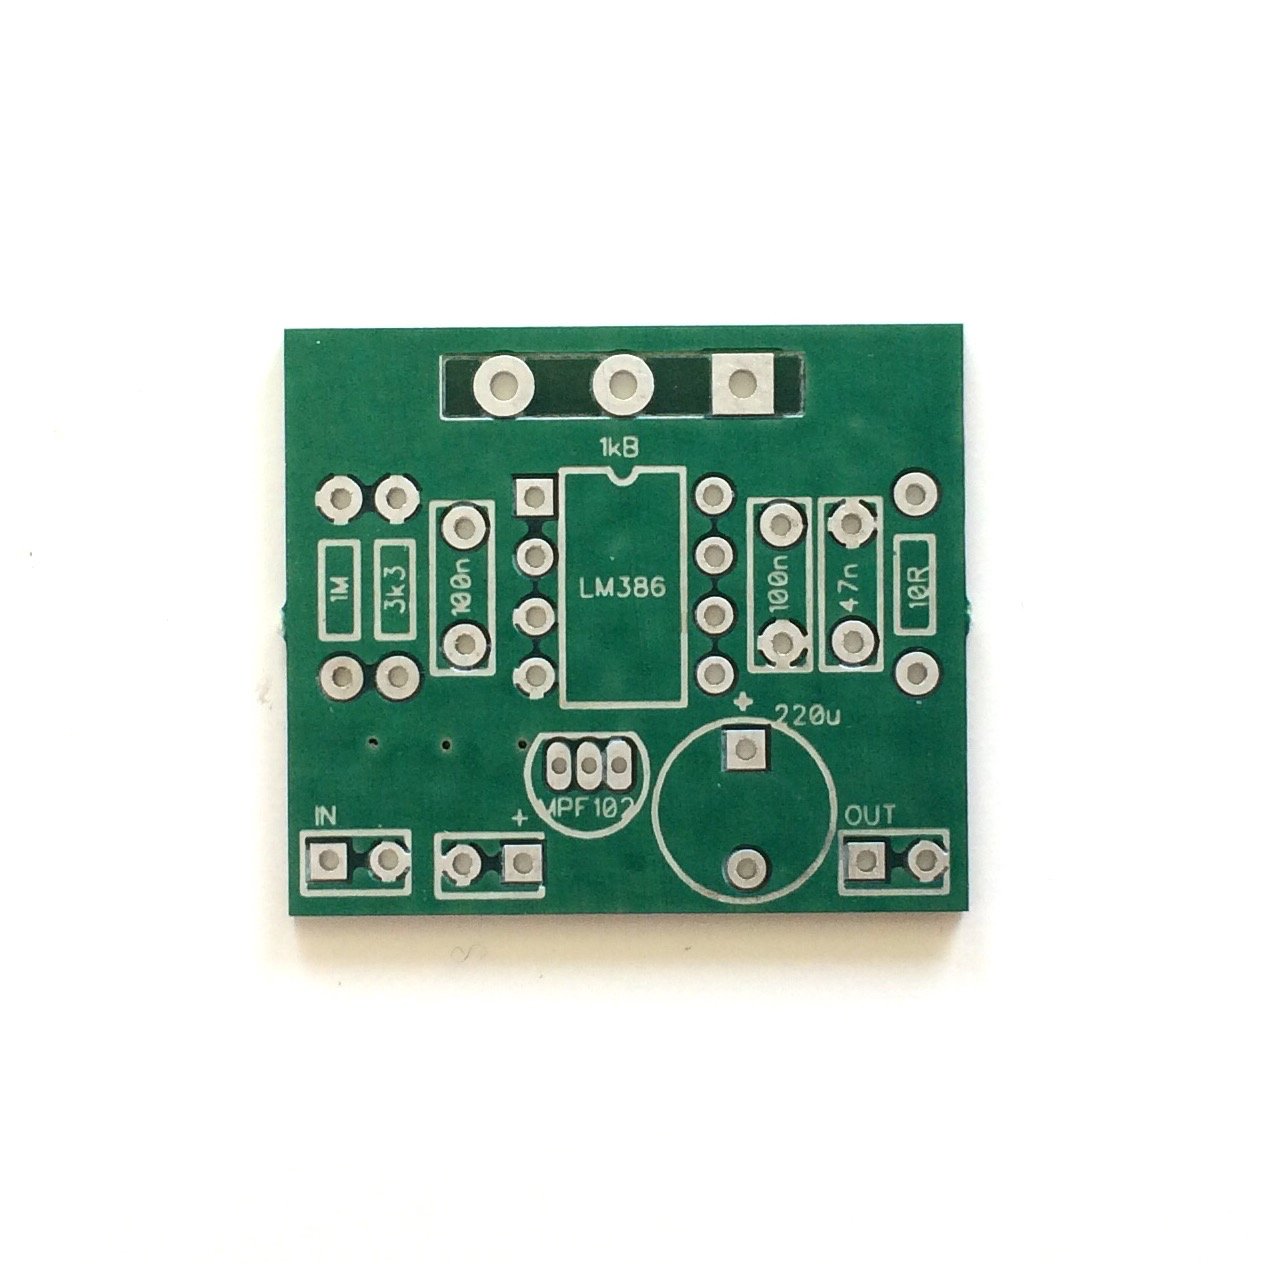 LM386 Guitar Amplifier (PCB only) from lileffects on Tindie